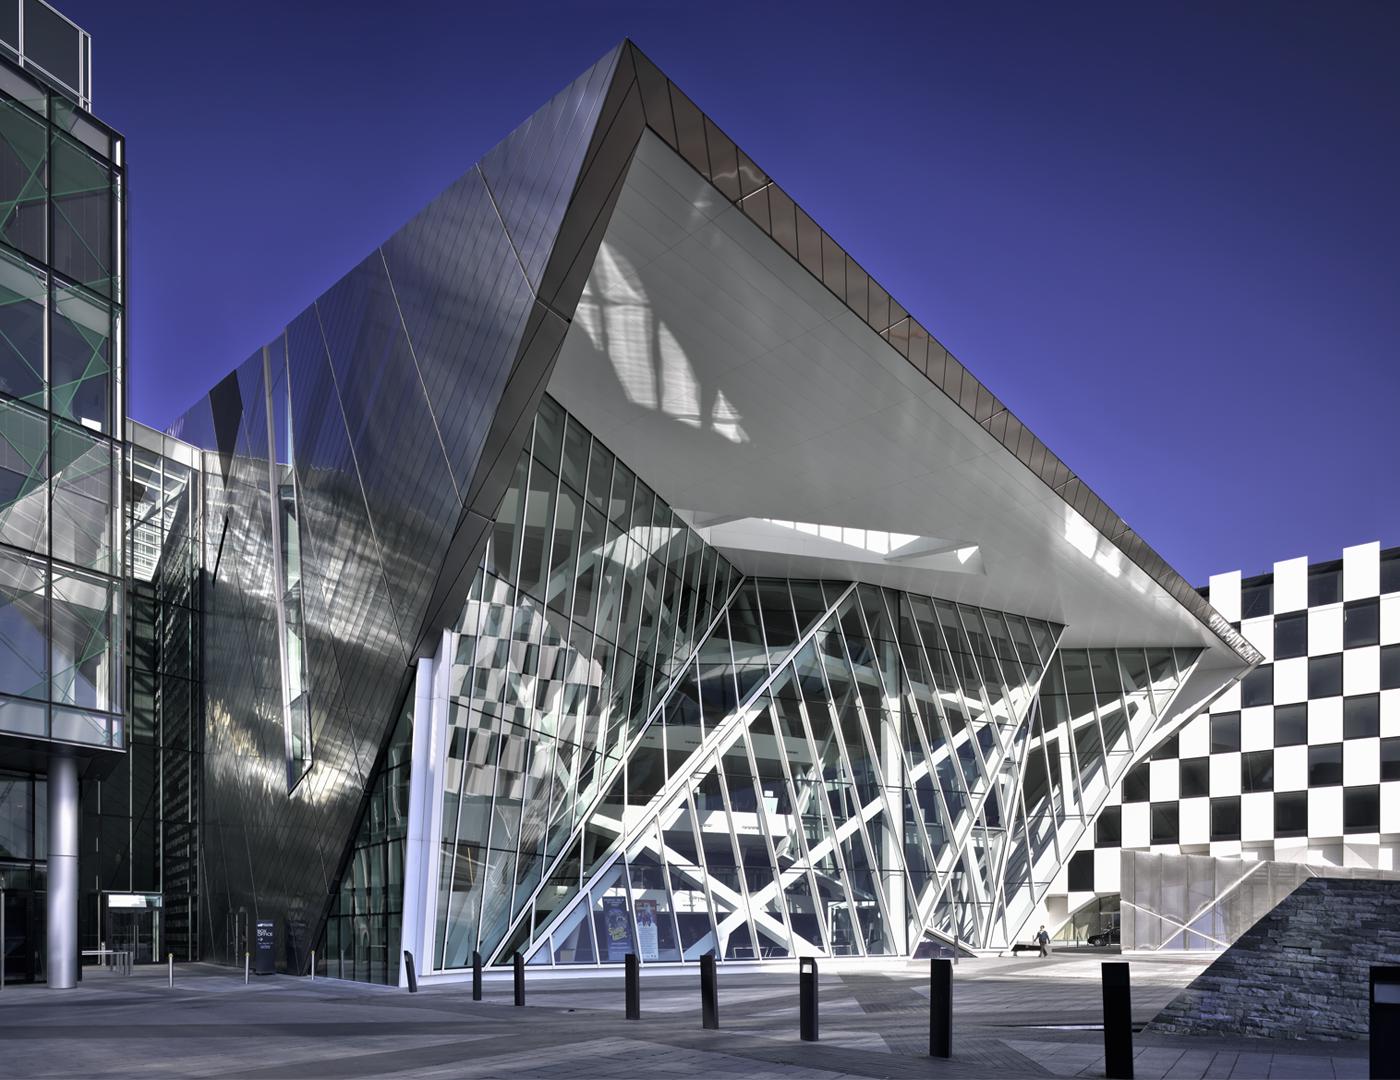 The Bord Gáis Energy Theatre designed by Daniel Libeskind